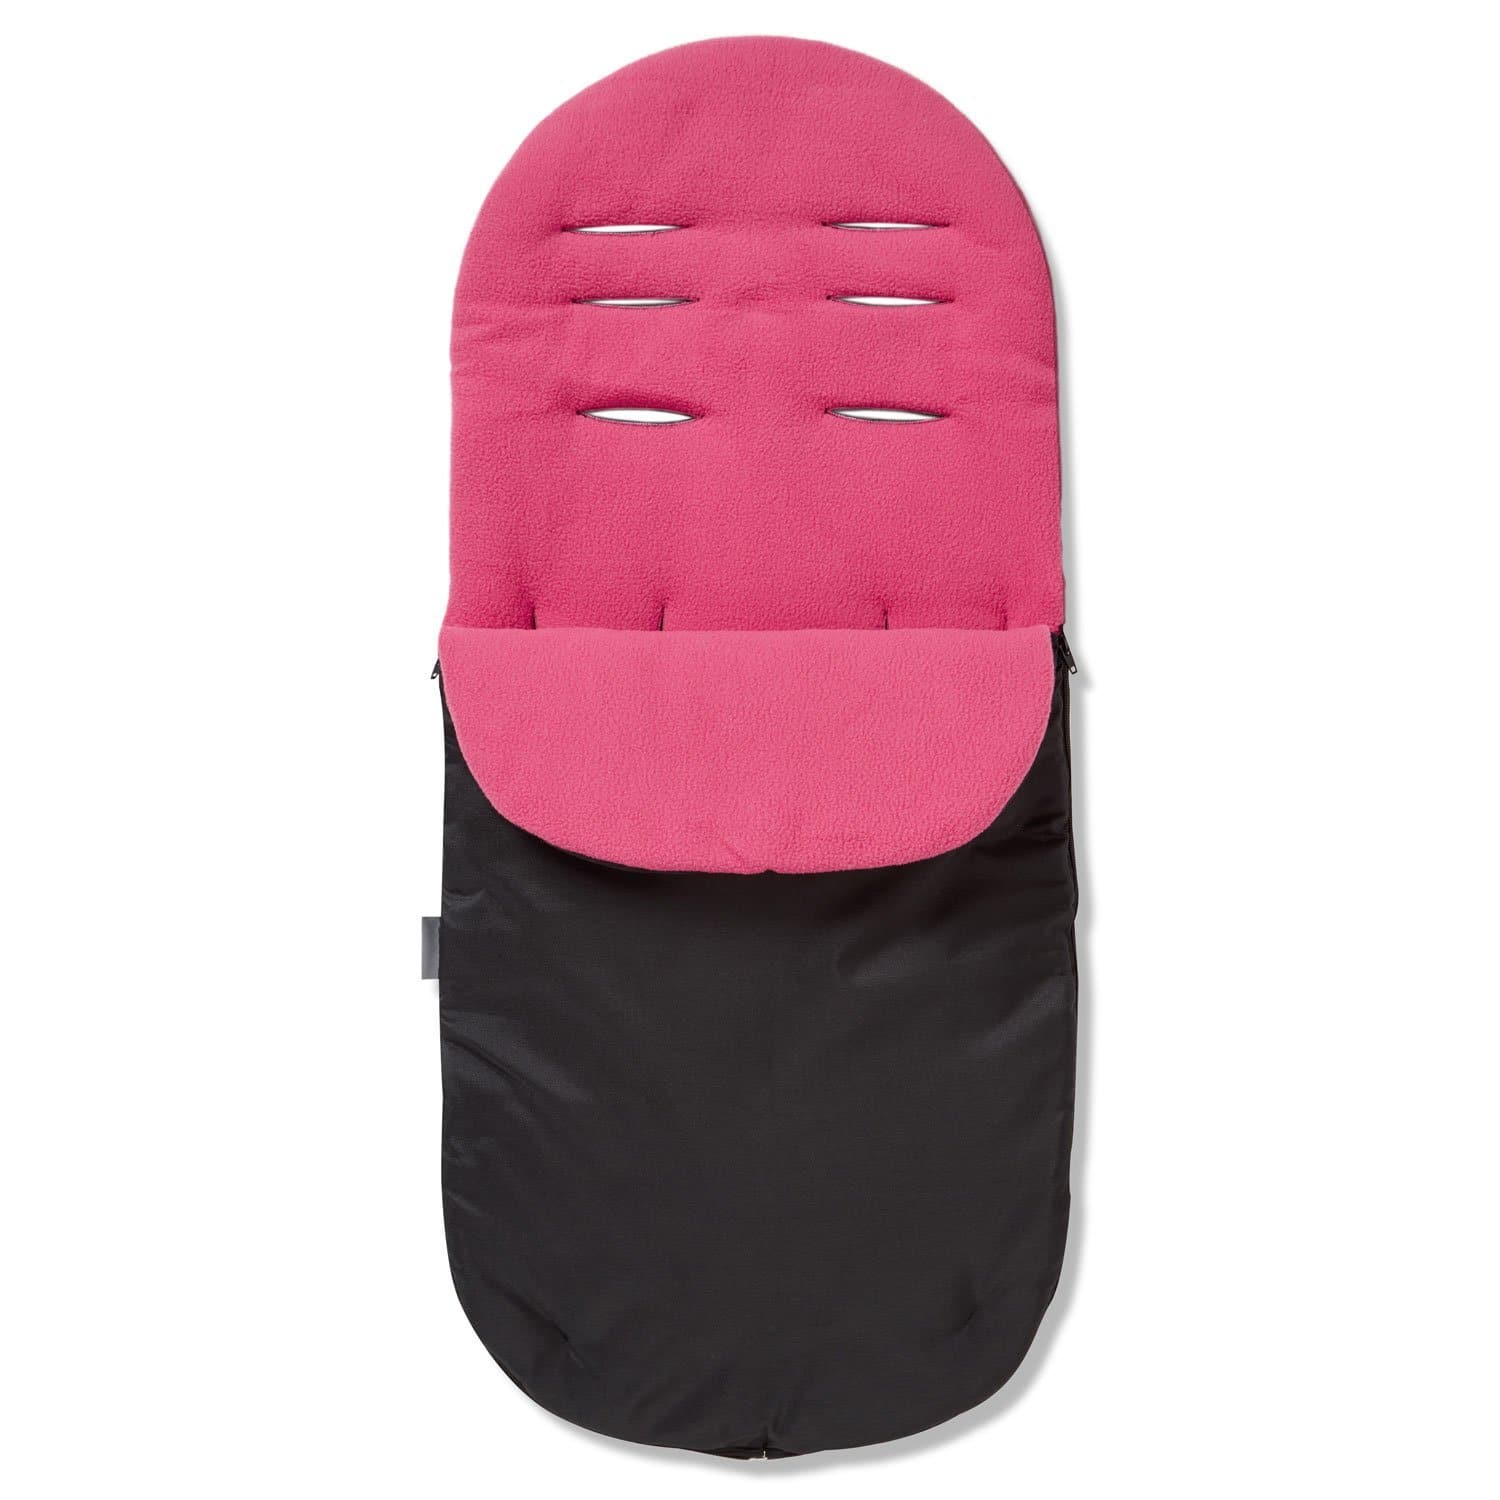 Footmuff / Cosy Toes Compatible with GB - Dark Pink / Fits All Models | For Your Little One